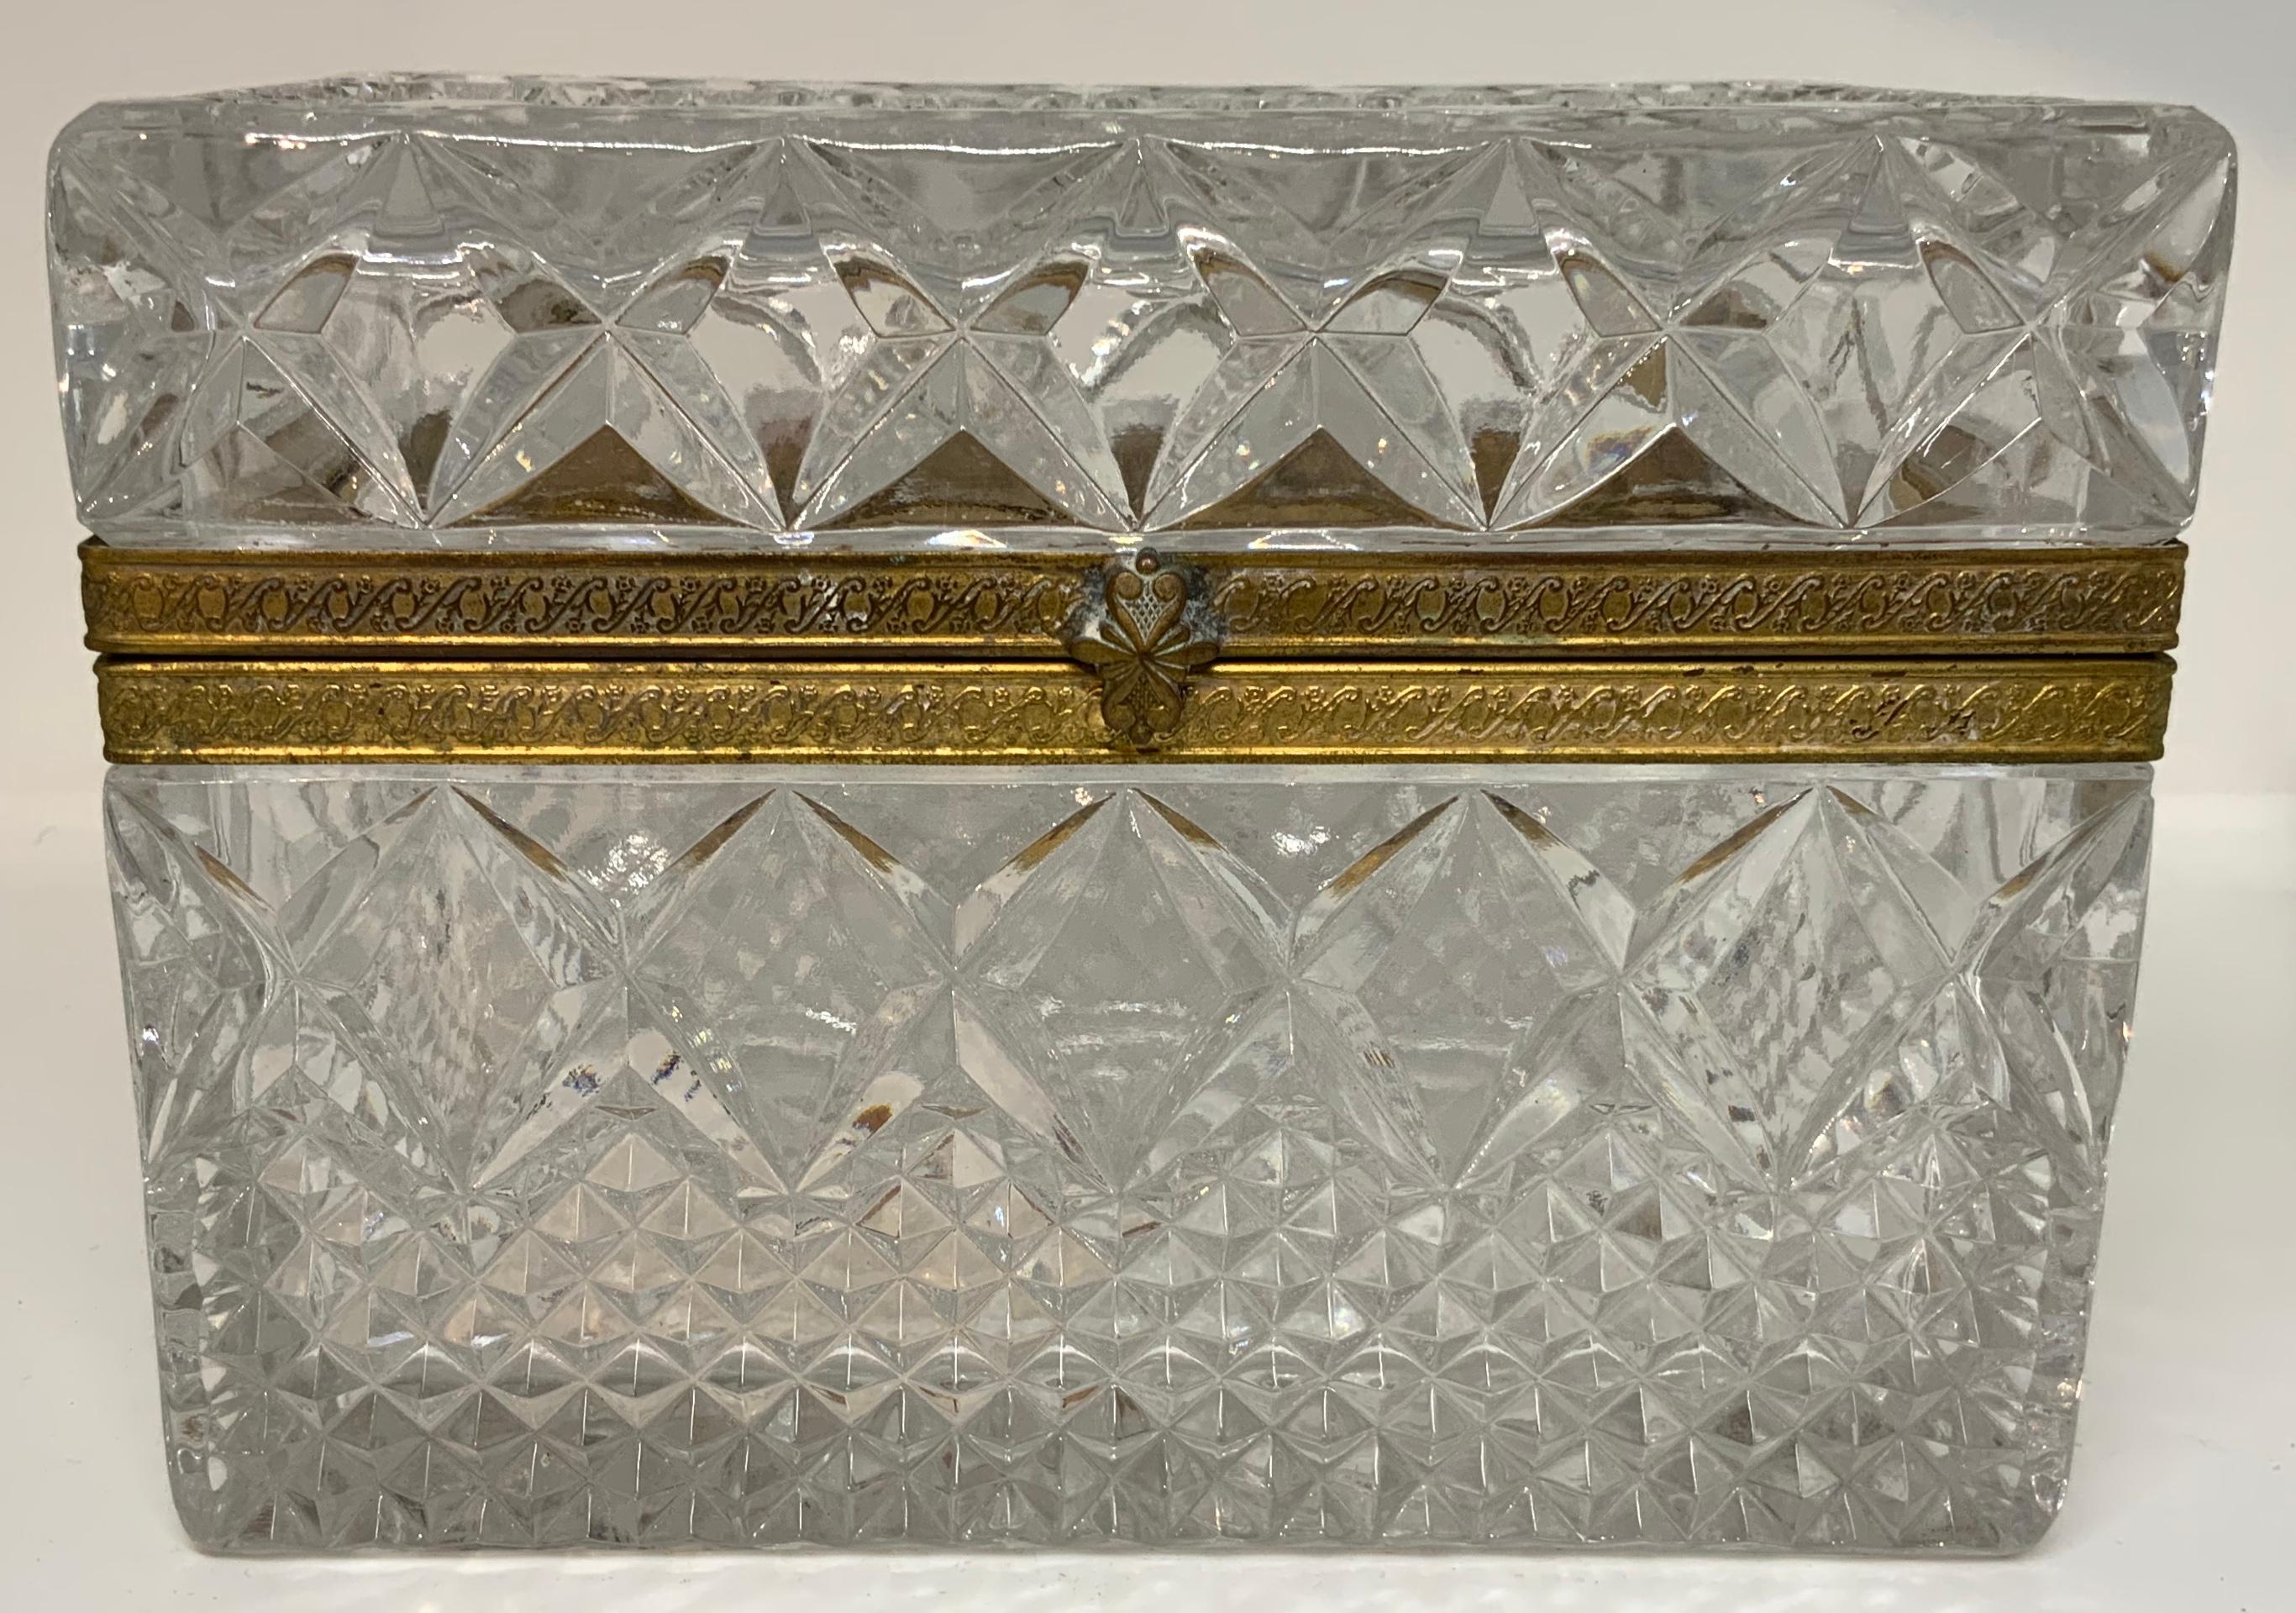 A large rectangular clear cut crystal box with small diamonds cut pattern in the center and bordered by large stars. A starburst is at the bottom. A gilt metal embossed with flowers and scrolls border the hinged lid and the upper top. A double